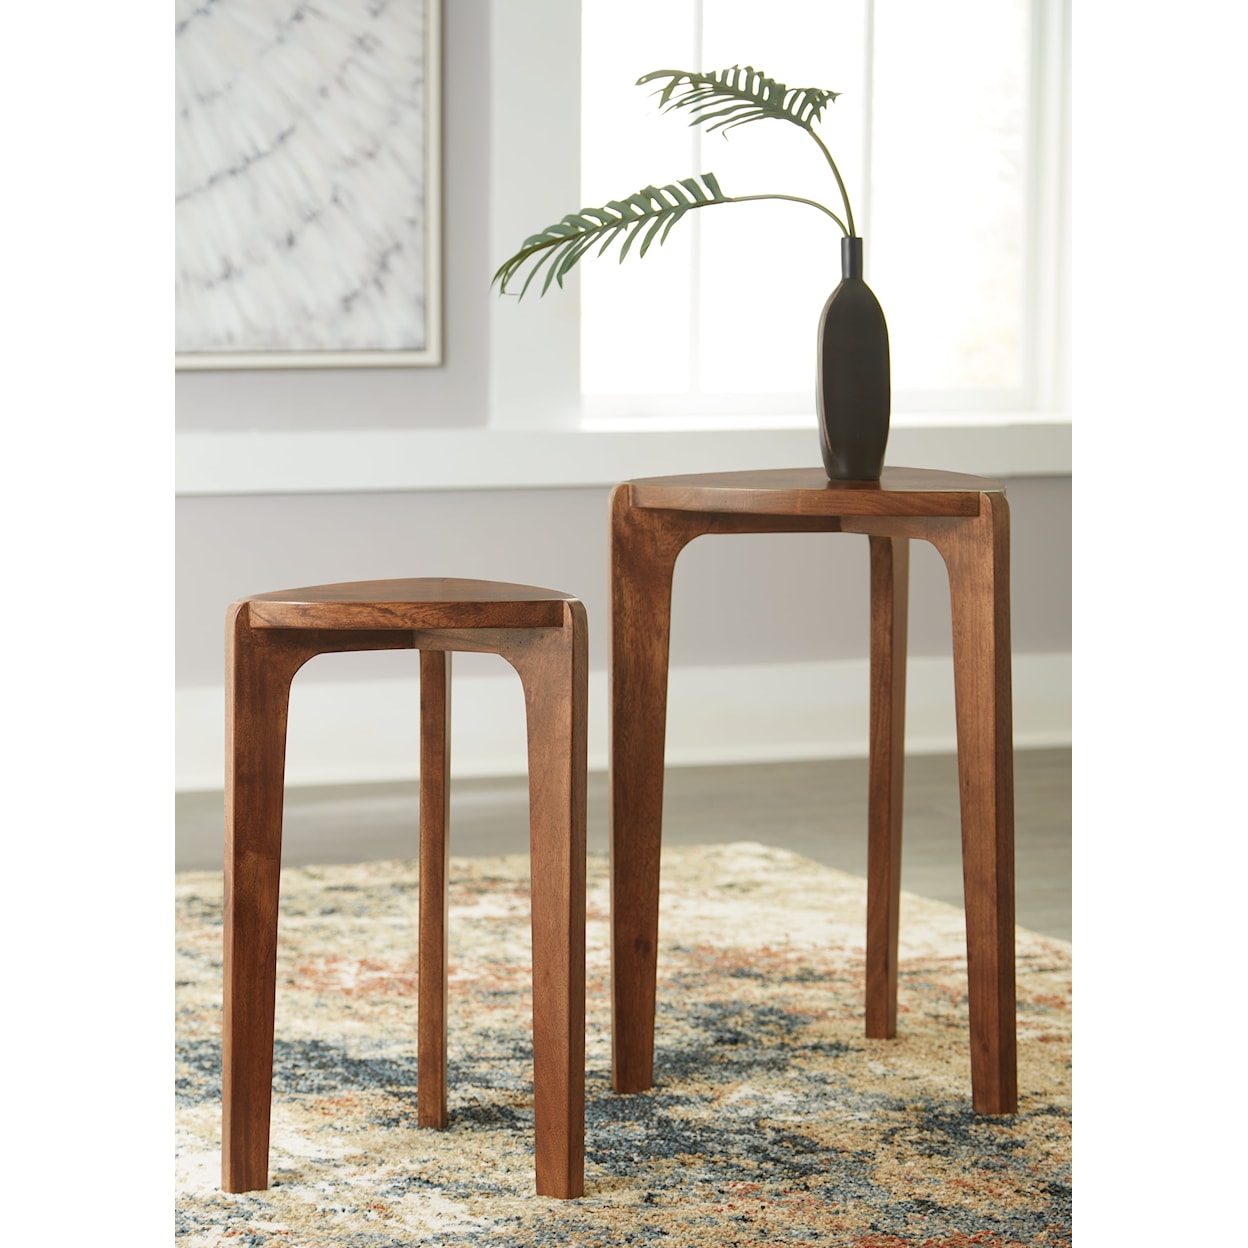 Ashley Furniture Signature Design Brynnleigh Accent Table (Set Of 2)